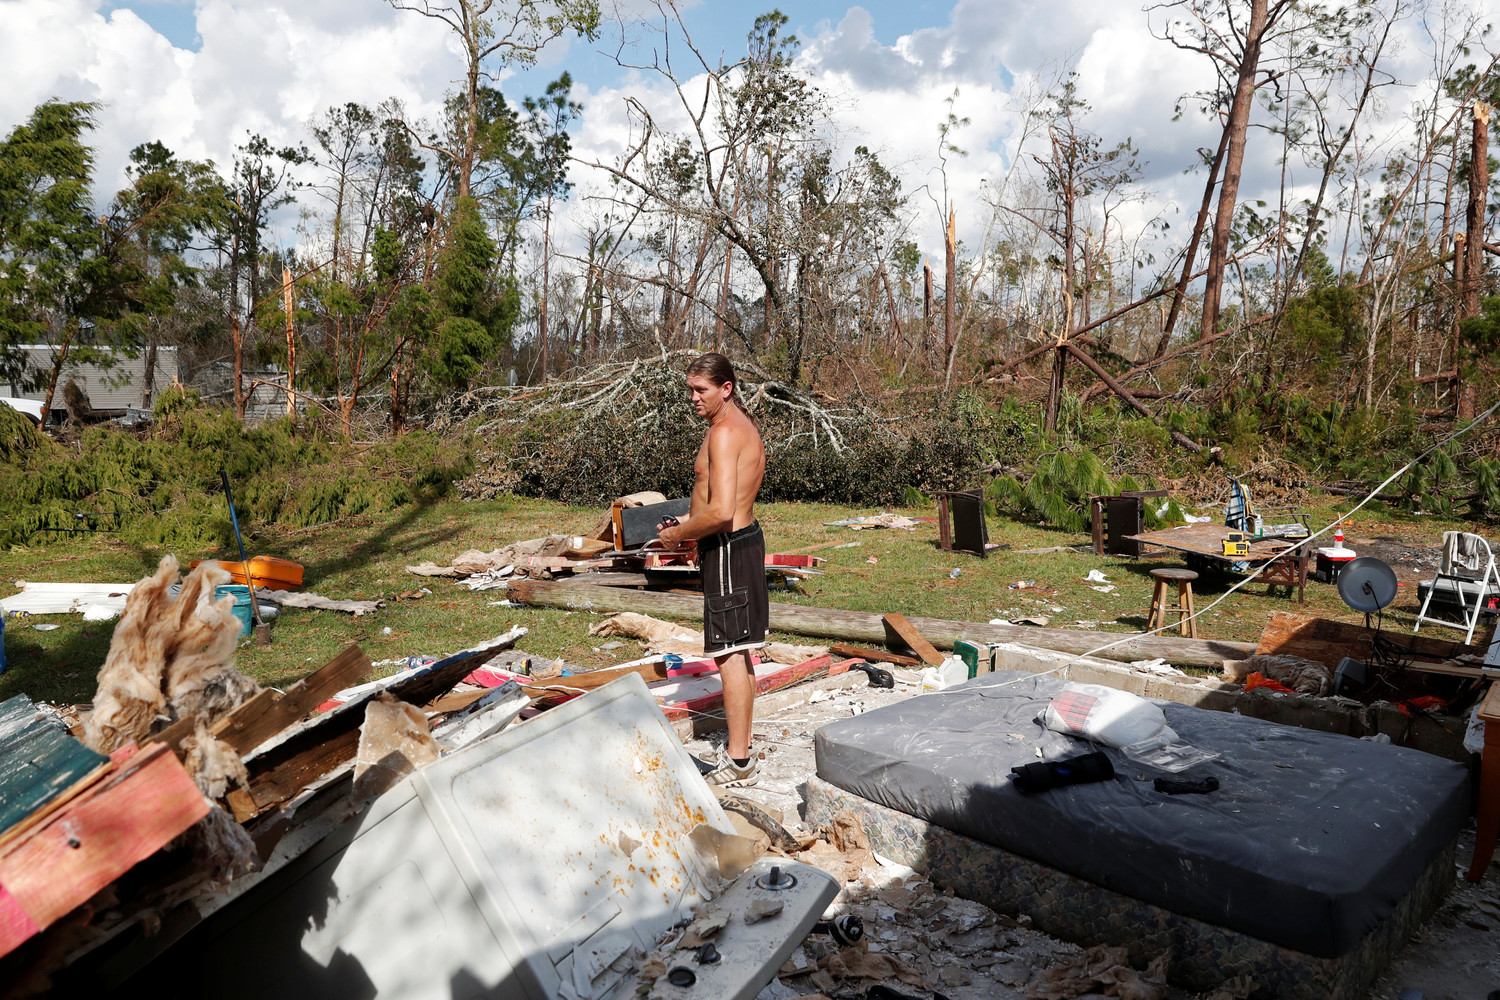 Gabriel Schaw stands in the remains of his destroyed home Oct. 16 in the aftermath of Hurricane Michael in Fountain, Fla. The hurricane killed at least 16 people in Florida, most of them in the coastal county that took a direct hit from the storm, state emergency authorities said. That’s in addition to at least 10 deaths elsewhere across the South.